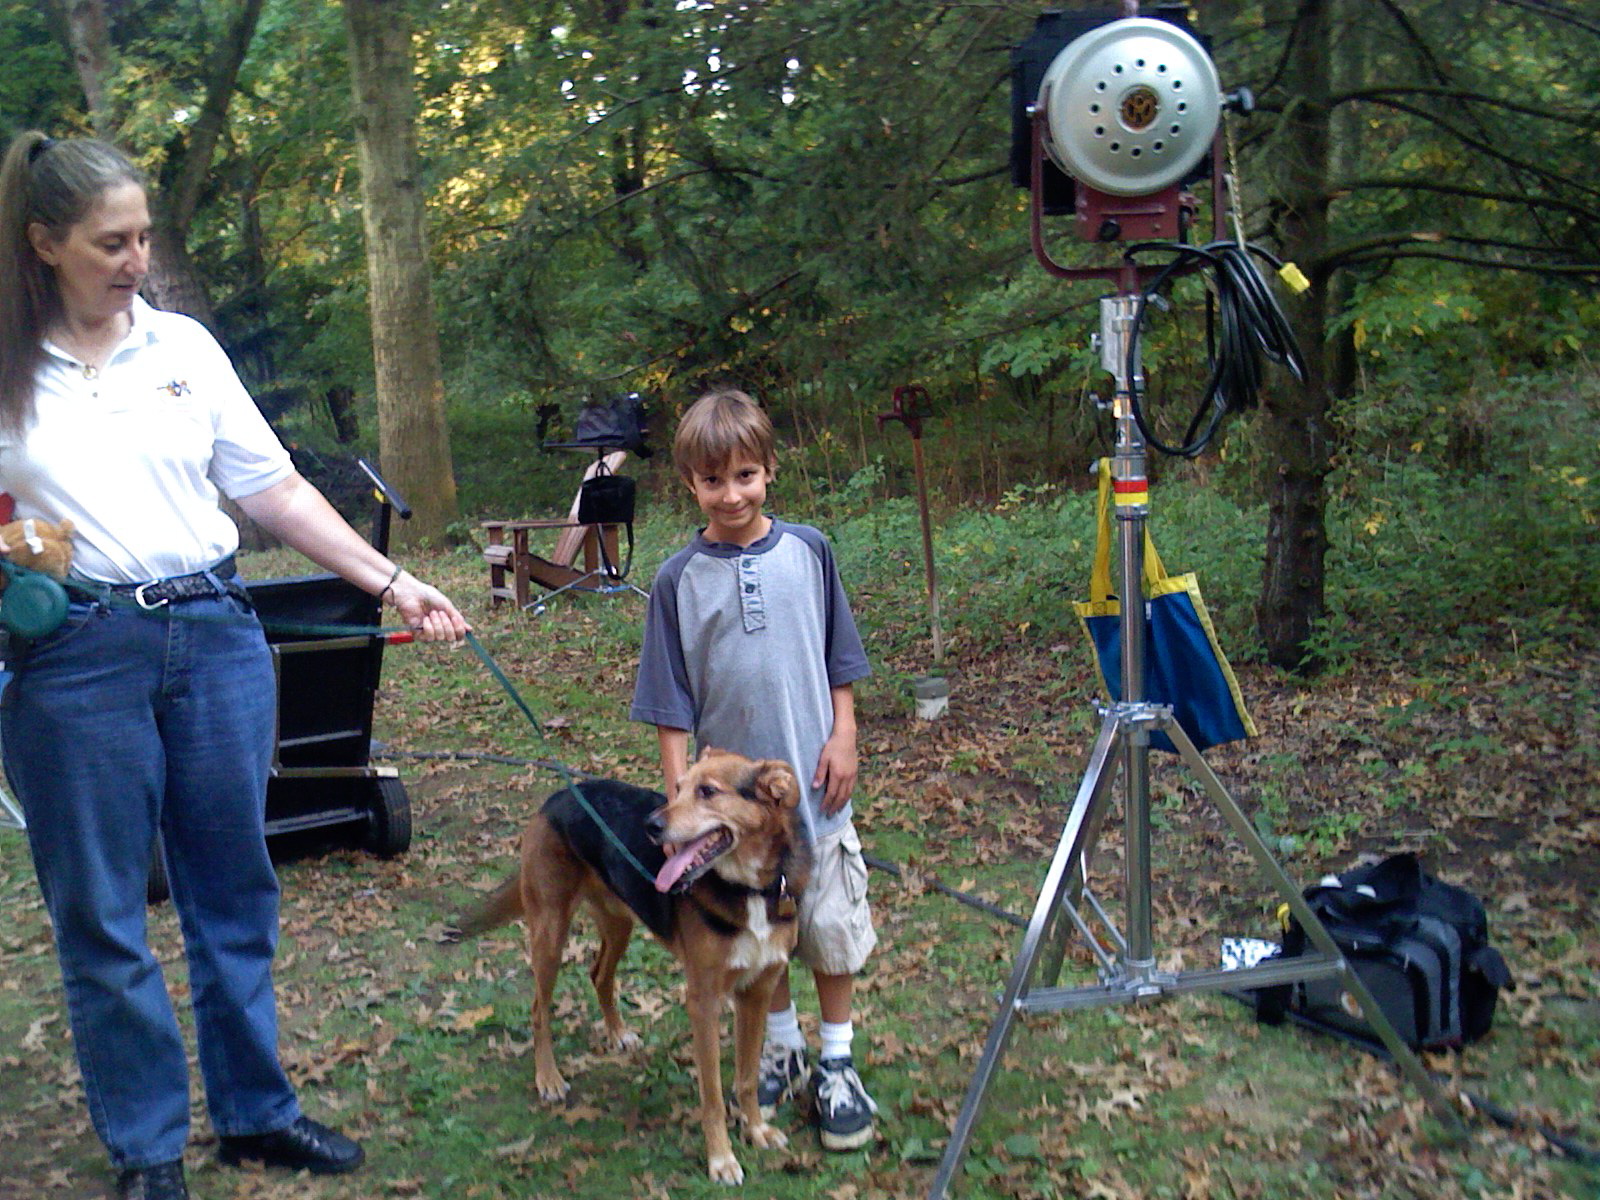 Brighthouse Network Commercial On Set 2007